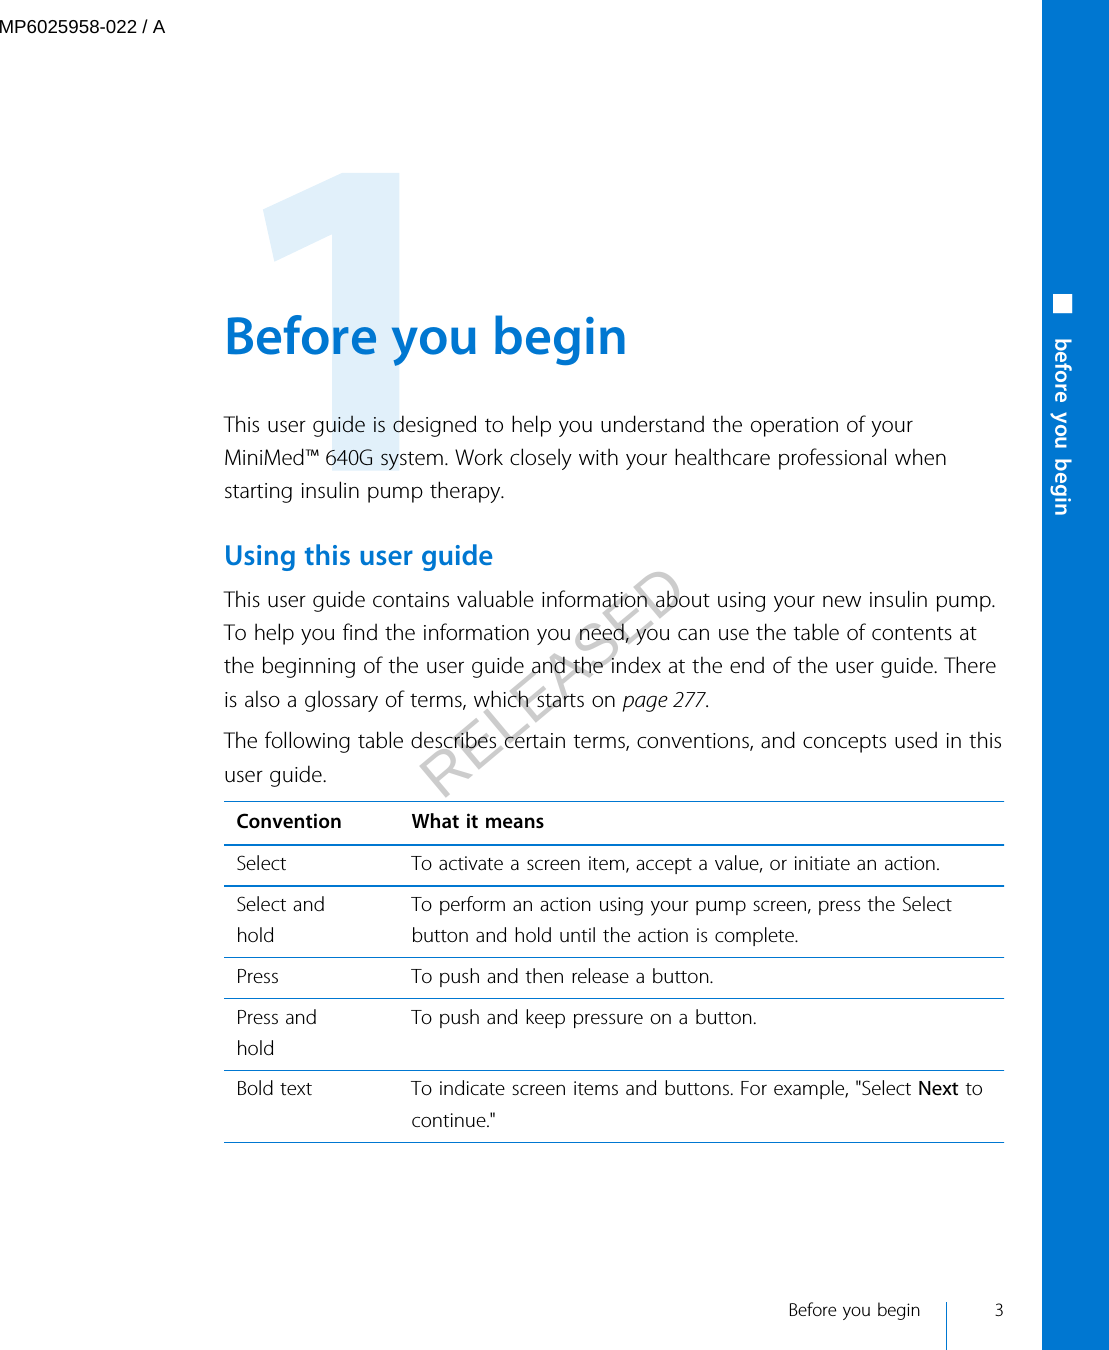  Before you beginThis user guide is designed to help you understand the operation of yourMiniMed™ 640G system. Work closely with your healthcare professional whenstarting insulin pump therapy.Using this user guideThis user guide contains valuable information about using your new insulin pump.To help you find the information you need, you can use the table of contents atthe beginning of the user guide and the index at the end of the user guide. Thereis also a glossary of terms, which starts on page 277.The following table describes certain terms, conventions, and concepts used in thisuser guide.Convention What it meansSelect To activate a screen item, accept a value, or initiate an action.Select andholdTo perform an action using your pump screen, press the Selectbutton and hold until the action is complete.Press To push and then release a button.Press andholdTo push and keep pressure on a button.Bold text To indicate screen items and buttons. For example, &quot;Select Next tocontinue.&quot; Before you begin 3■ before you beginMP6025958-022 / ARELEASED